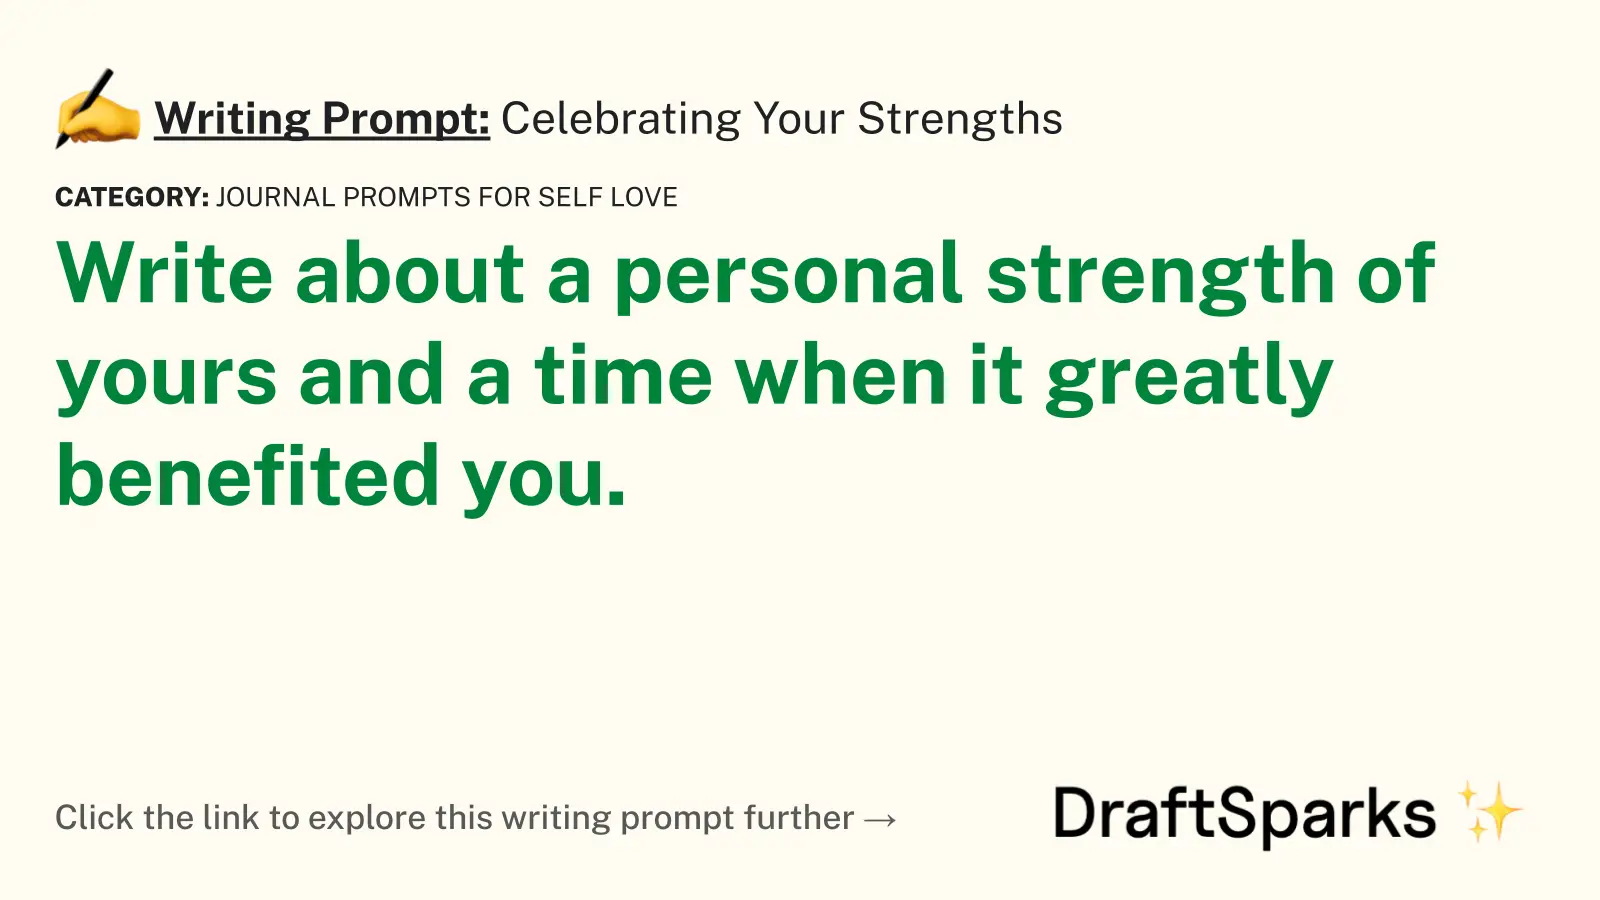 Celebrating Your Strengths